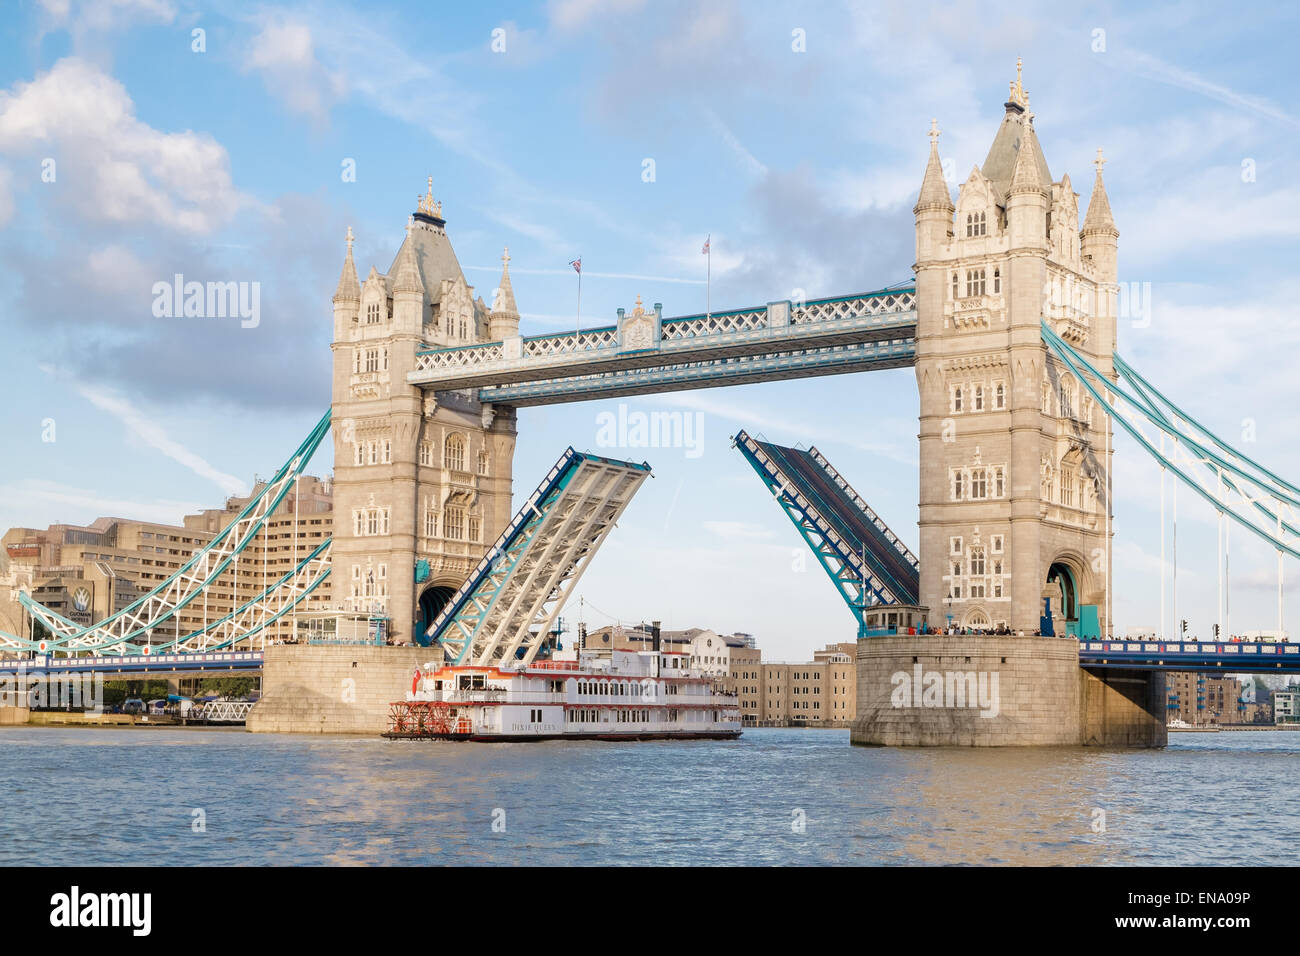 Dixie Queen paddle boat passing under Tower bridge London UK Stock Photo